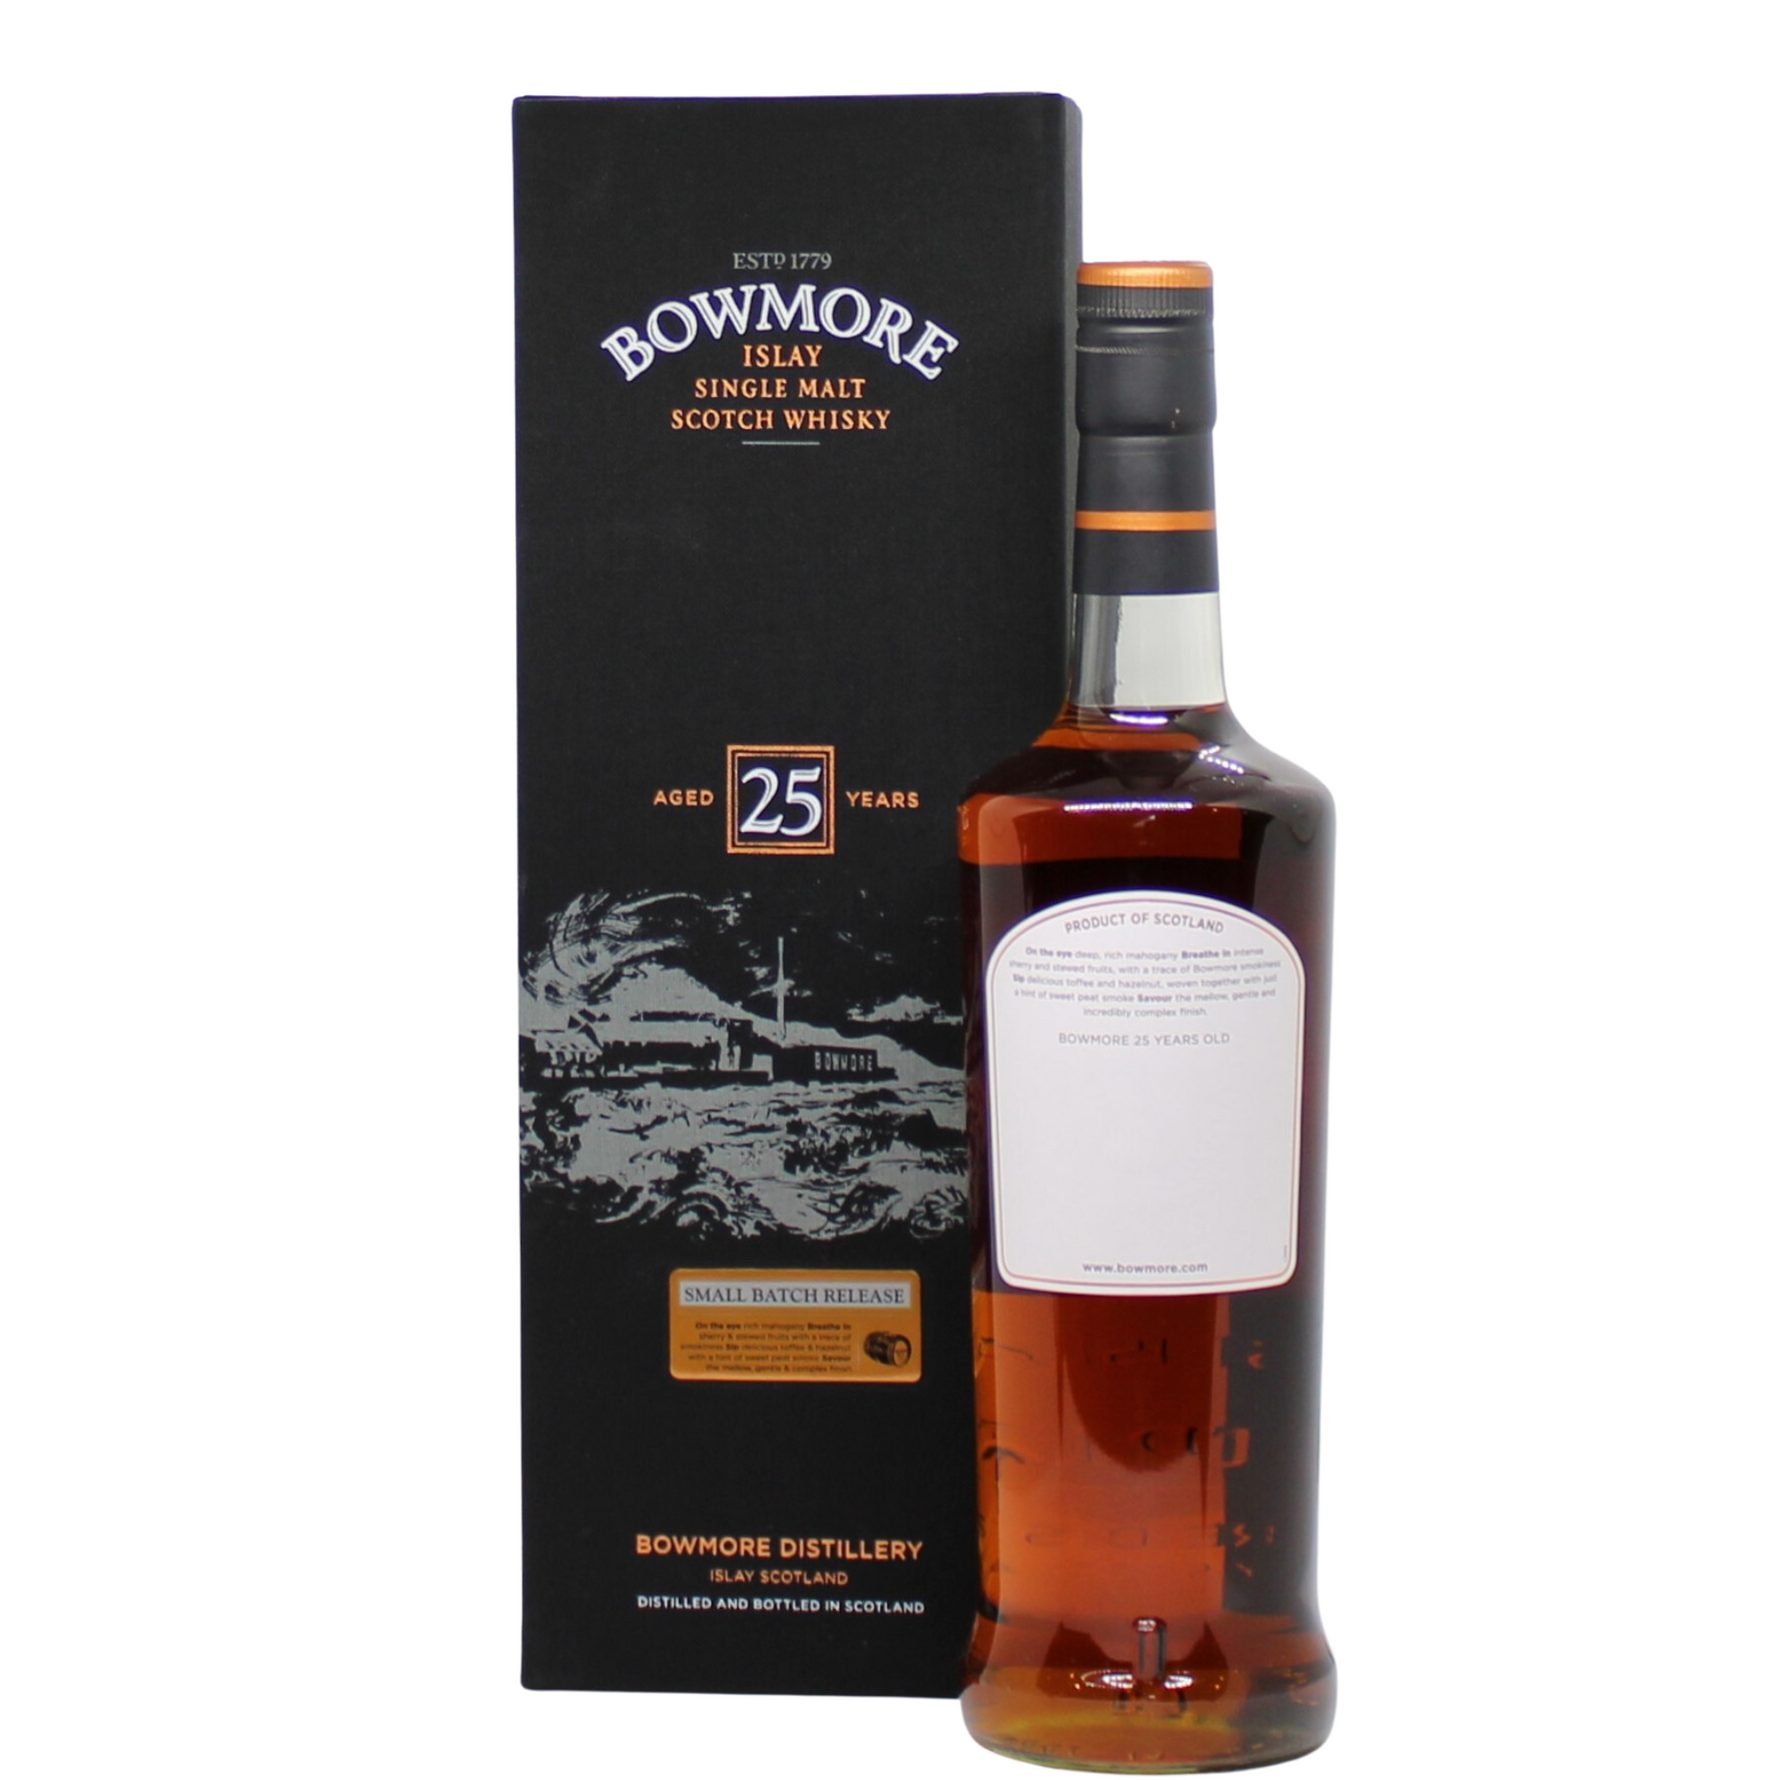 Bowmore 25 Years Old Small Batch Release Islay Single Malt Scotch Whisky